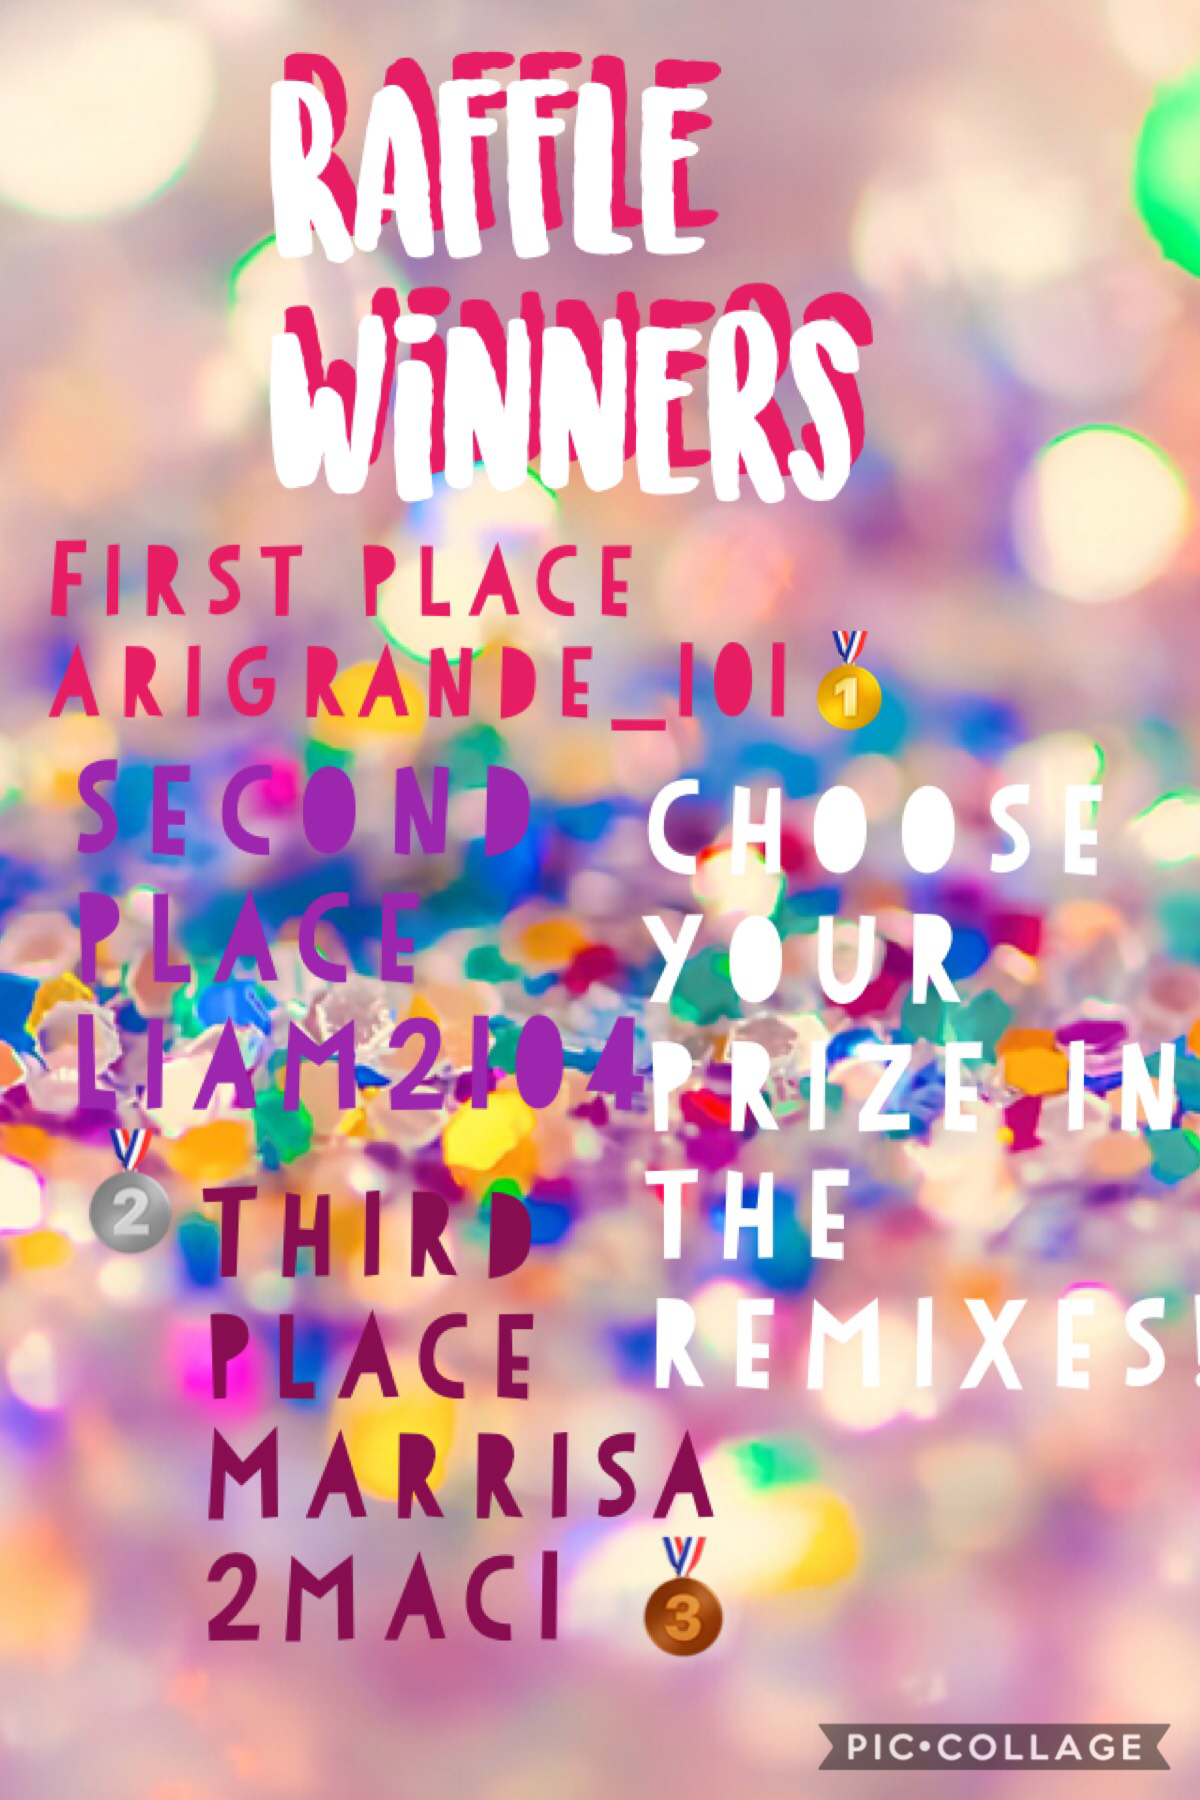 Congrats everyone who won to make it fair I let my cat decide who won first place then I raffled the other 2 also prizes are in remixes so choose which prize you want!!!!